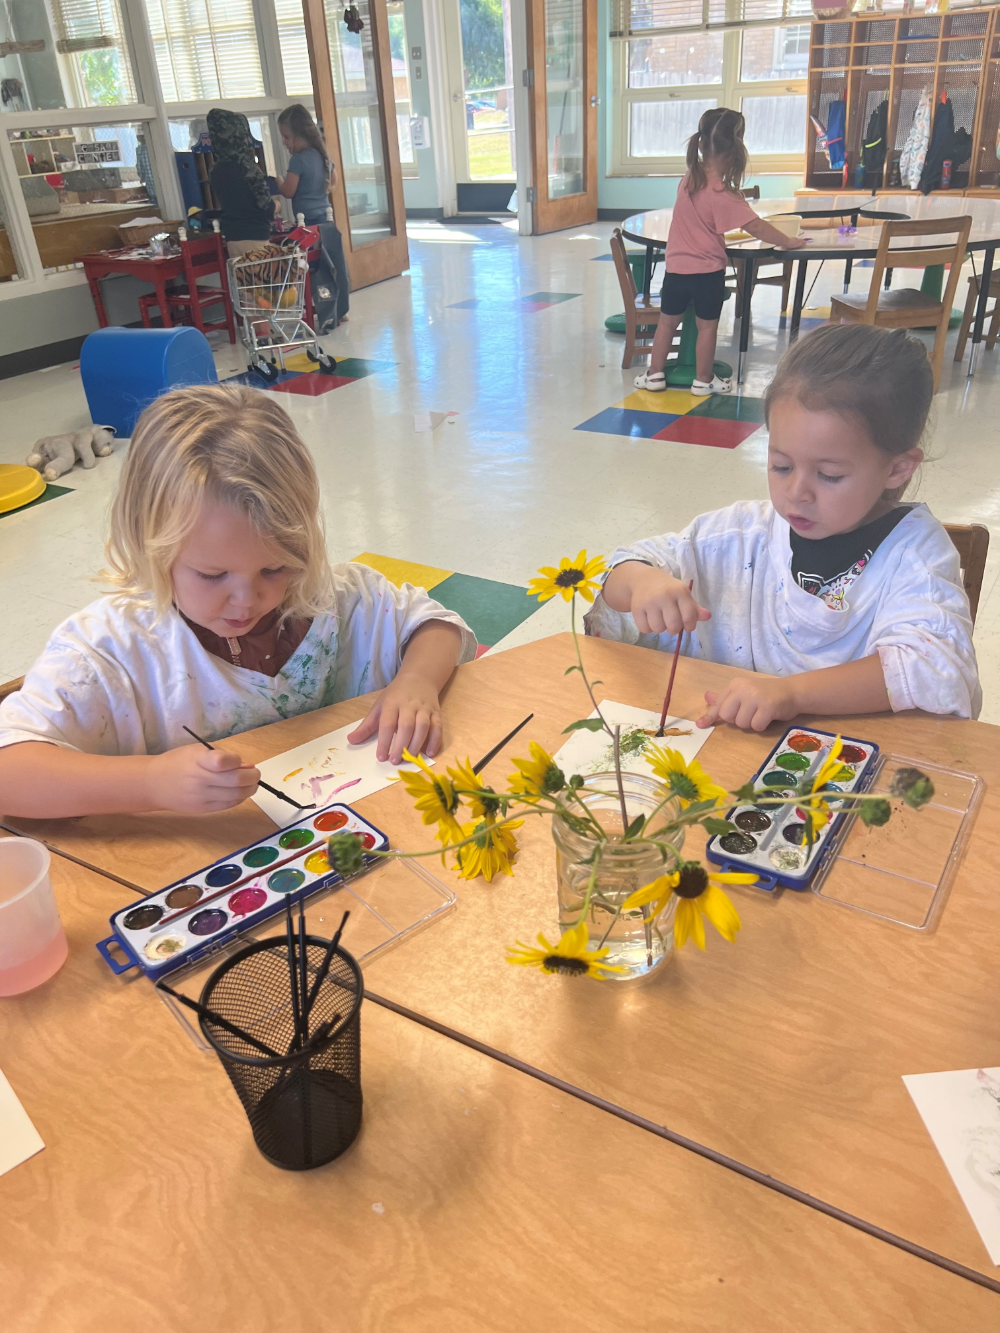 Children using watercolor paints at a table.